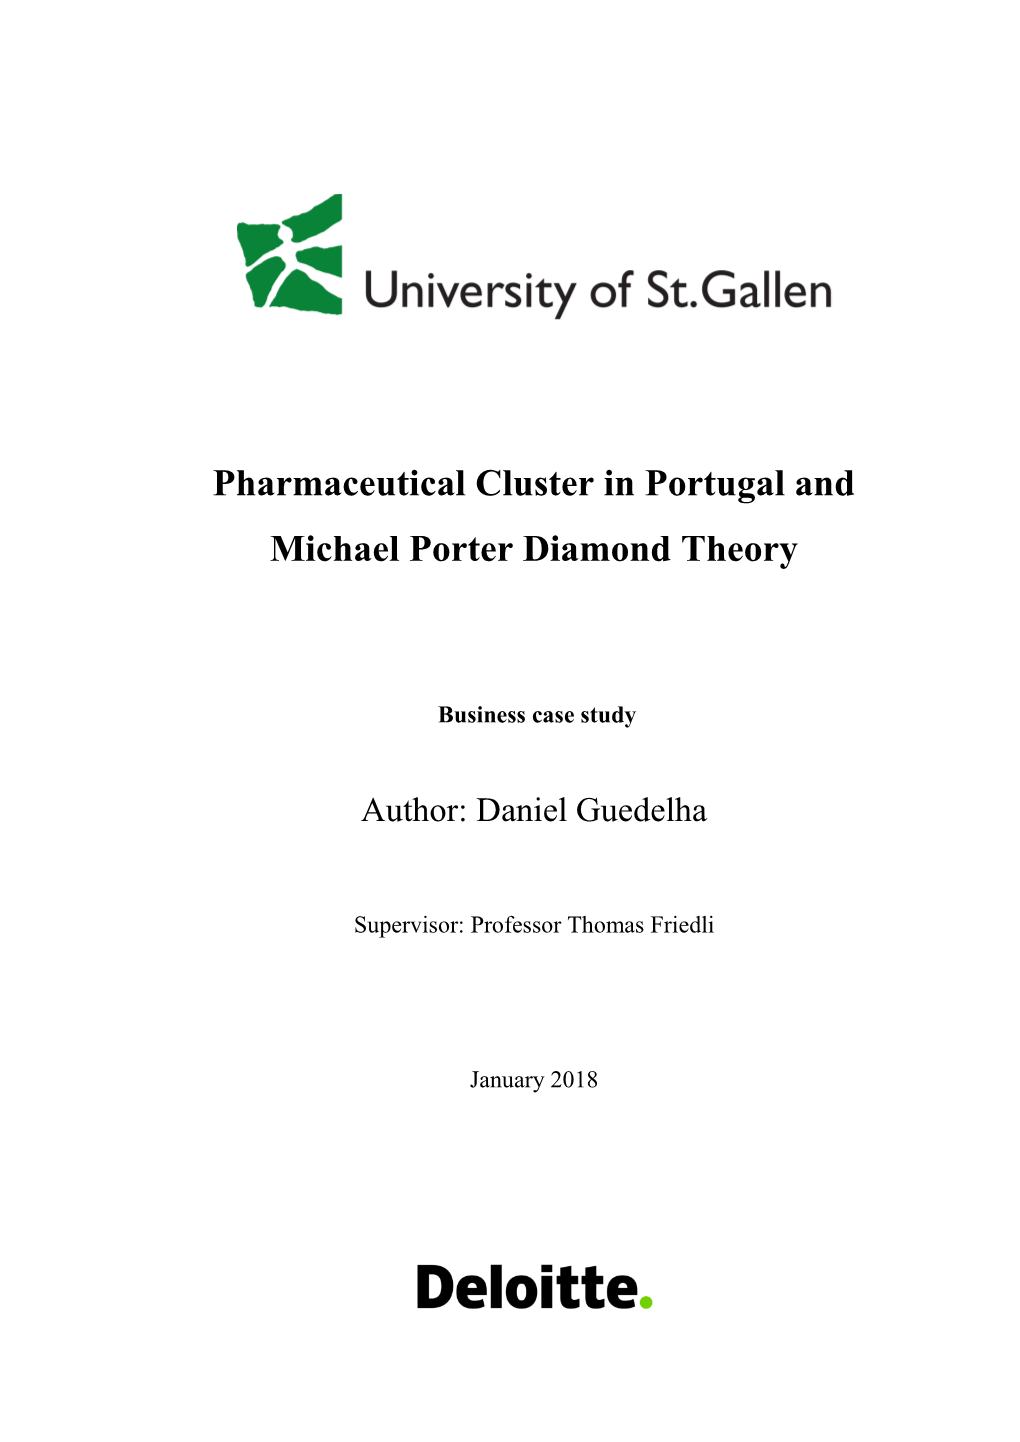 Pharmaceutical Cluster in Portugal and Michael Porter Diamond Theory